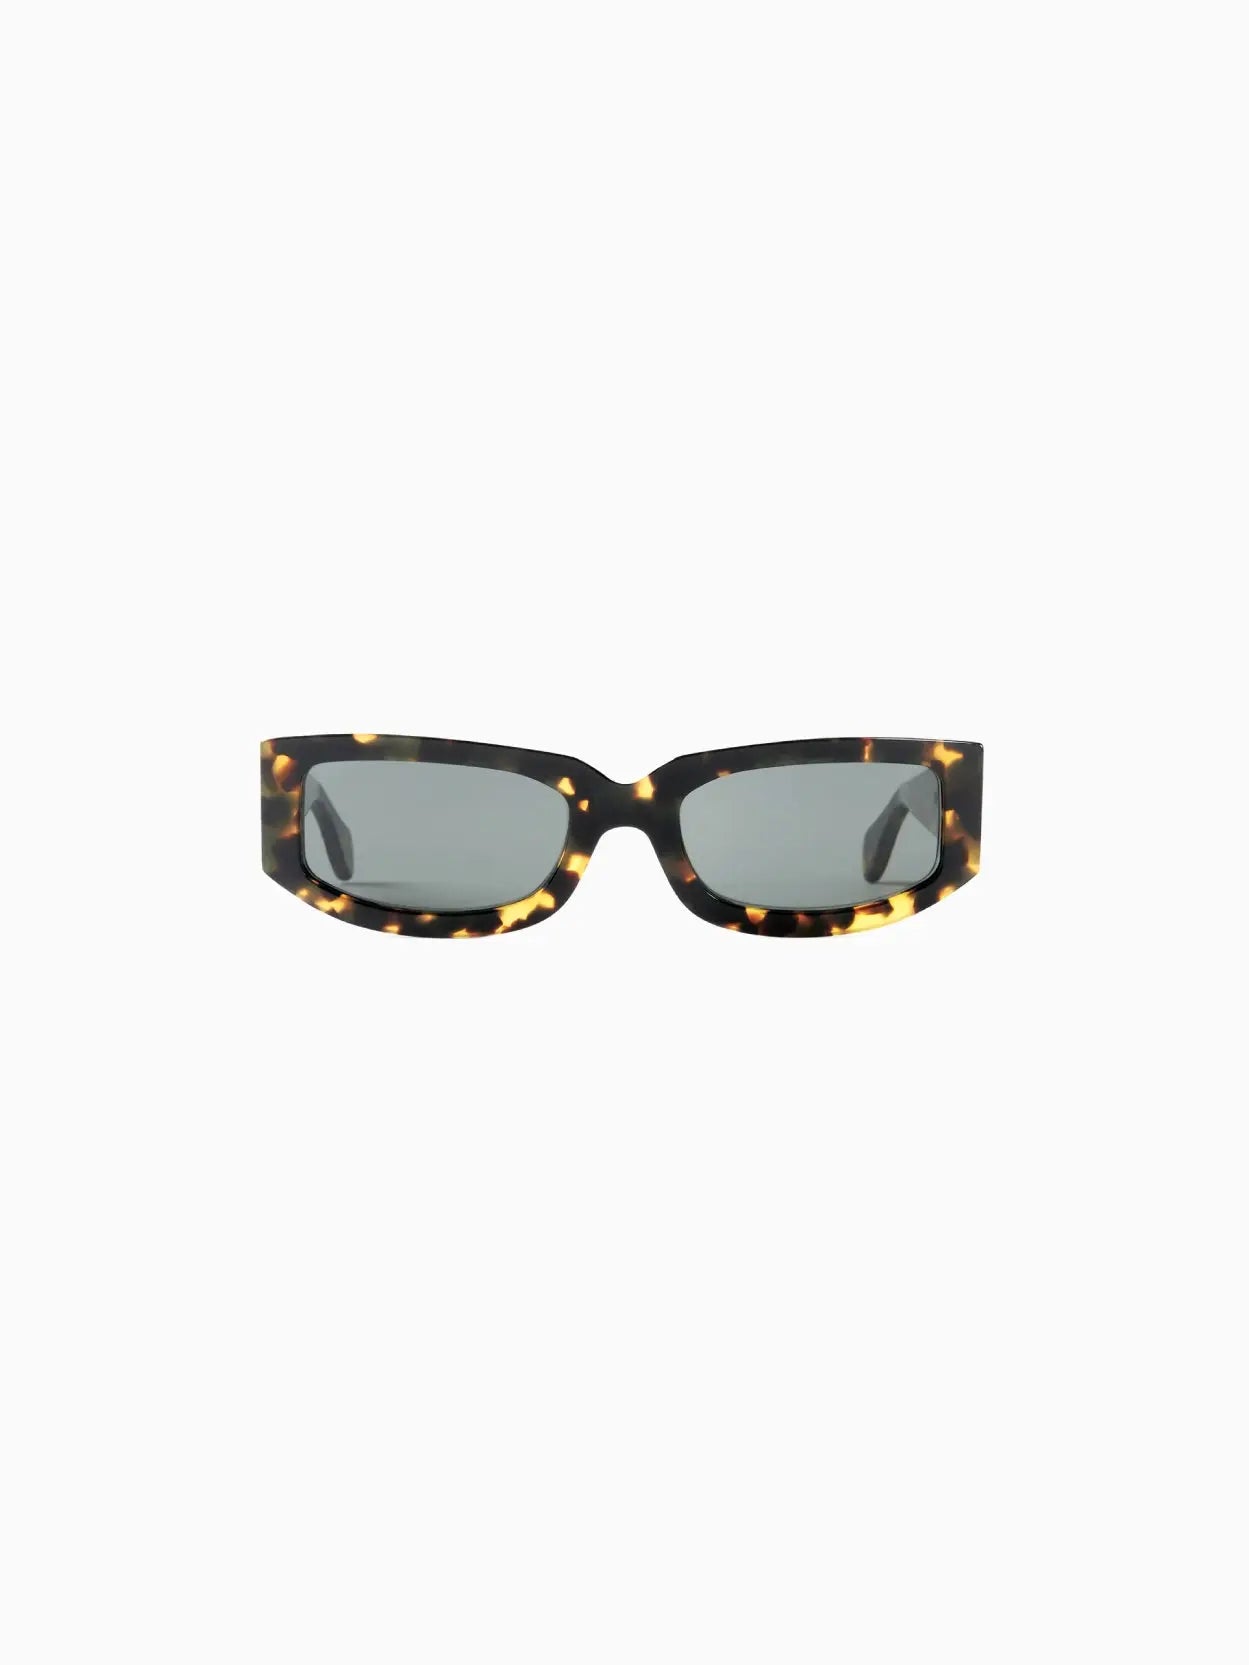 The Sunnei Prototipo 1.1 Sunglasses Havana with rectangular frames in a tortoiseshell pattern have dark and slightly reflective lenses. The design, available at Bassalstore in Barcelona, is bold and stylish.